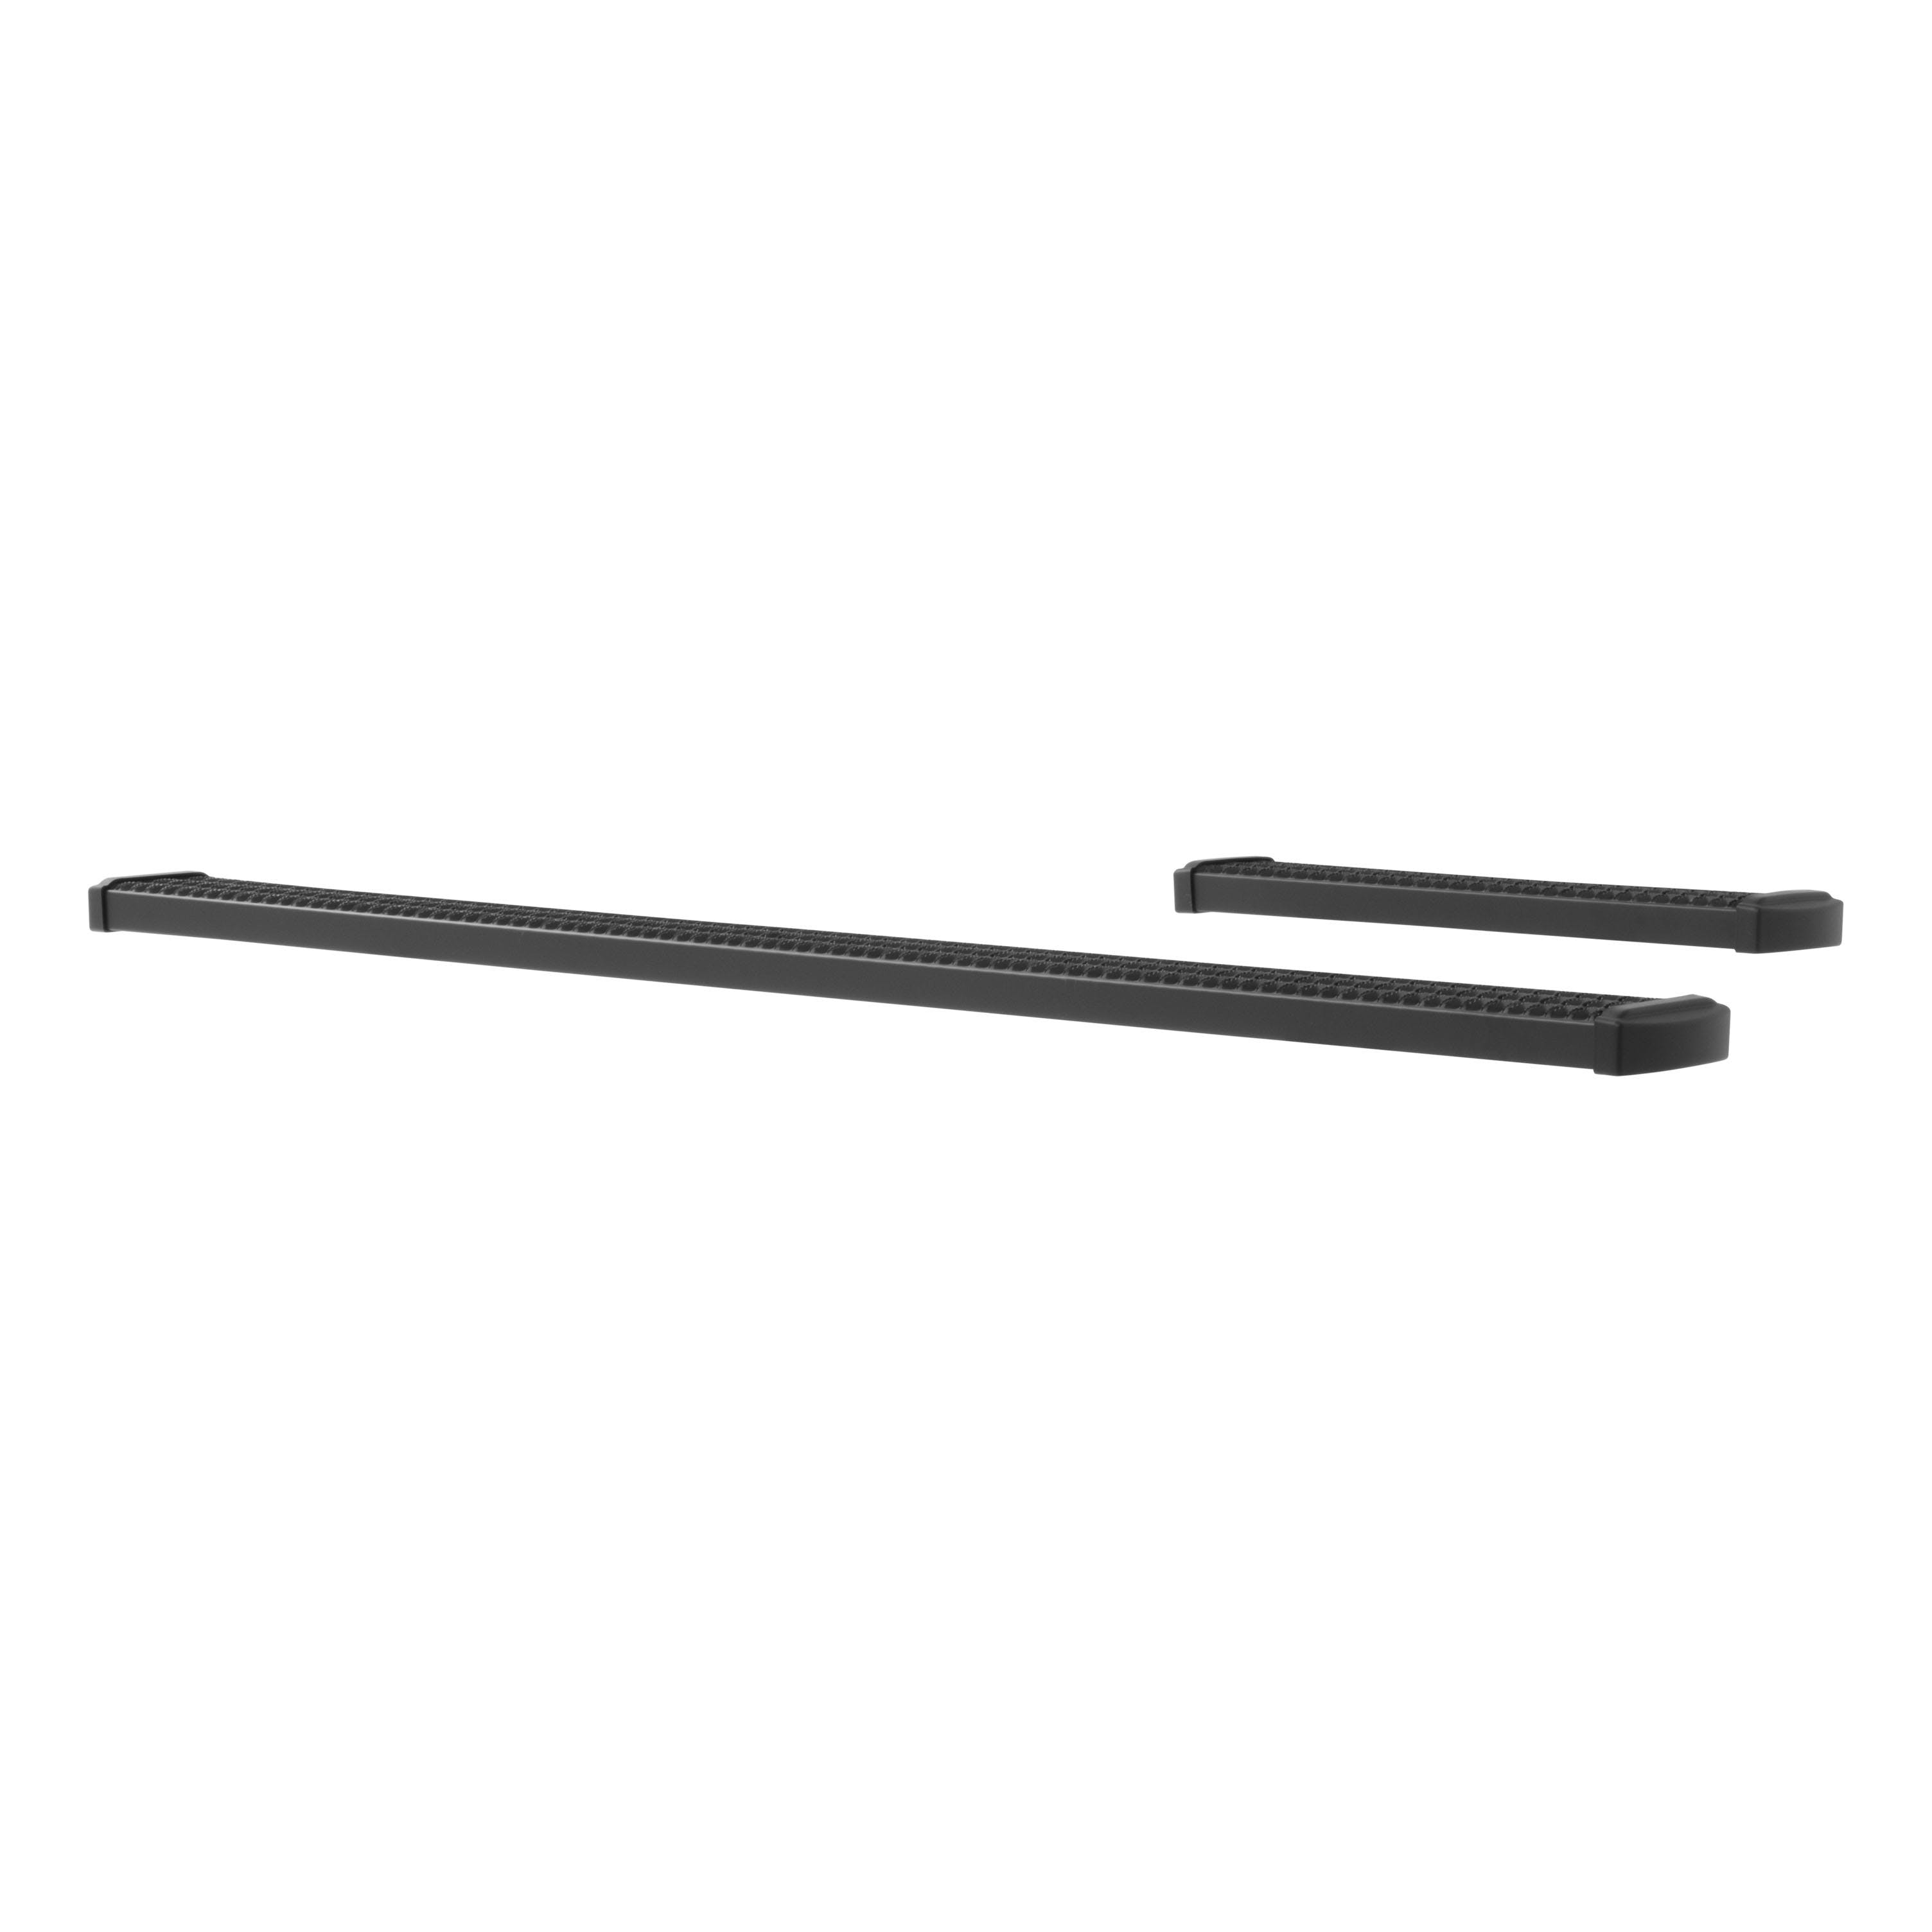 LUVERNE 415100-401164 Grip Step 7 inch Running Boards